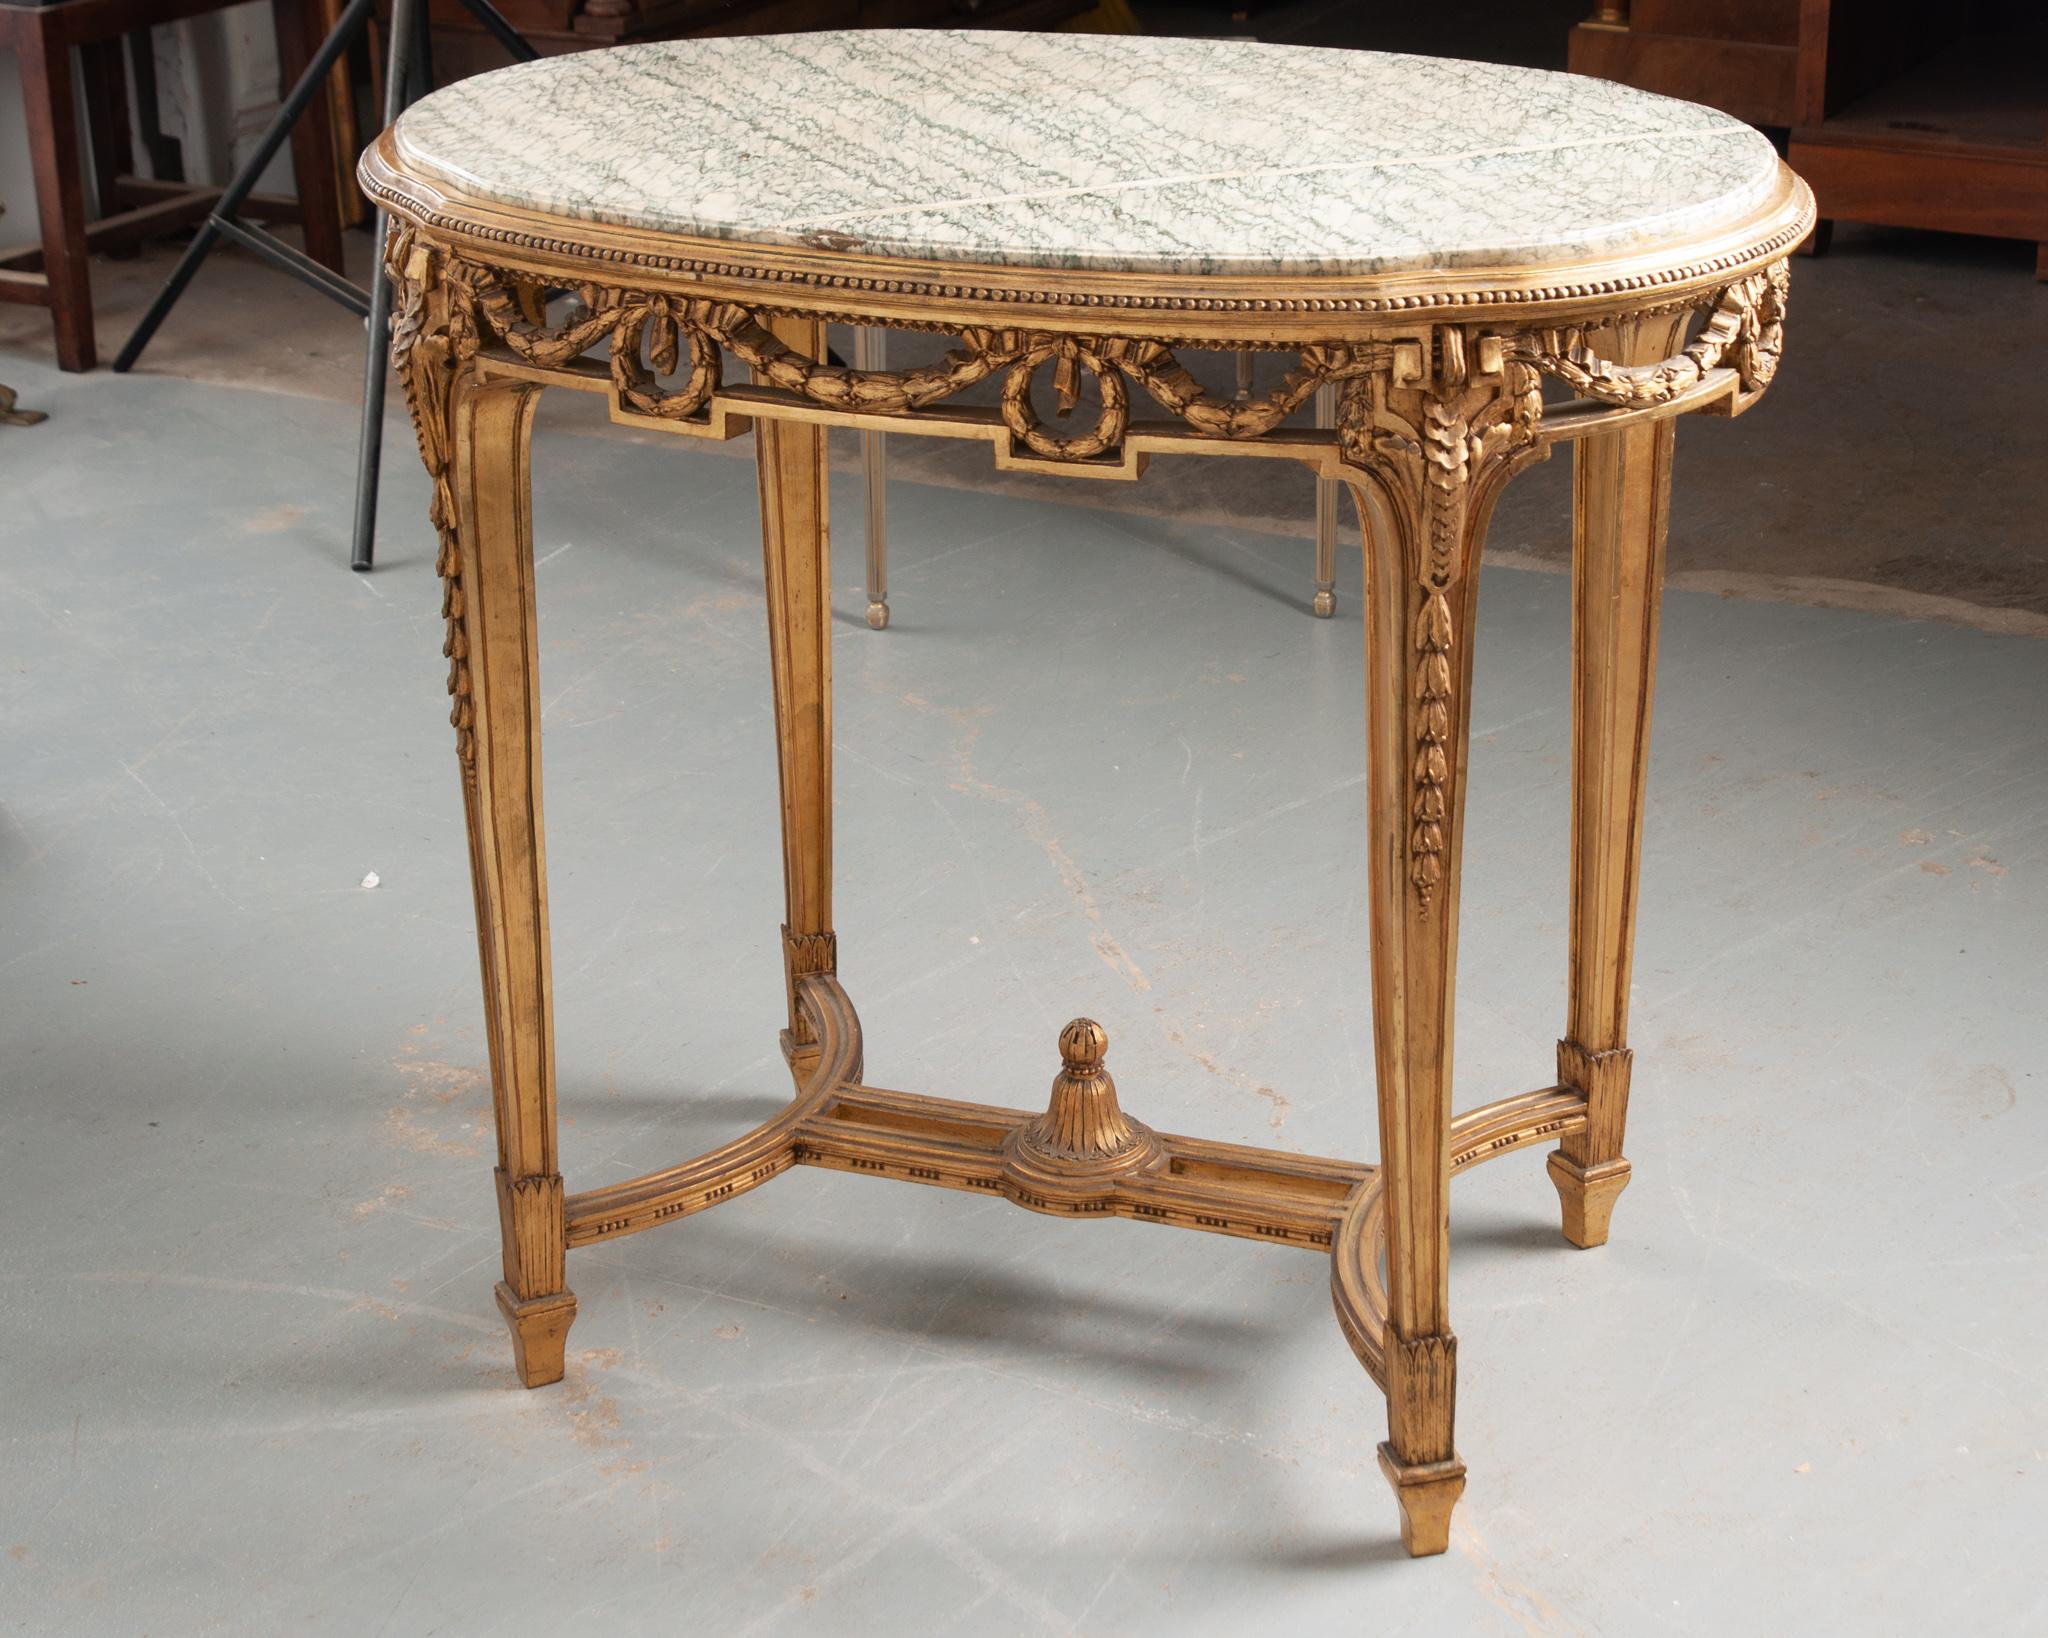 A stunning Louis XVI style center table from 19th century France. The inset white marble top with striking green veining is in good antique condition. The gold gilt frame is incredibly carved; a bead perimeter borders the marble top and pierced